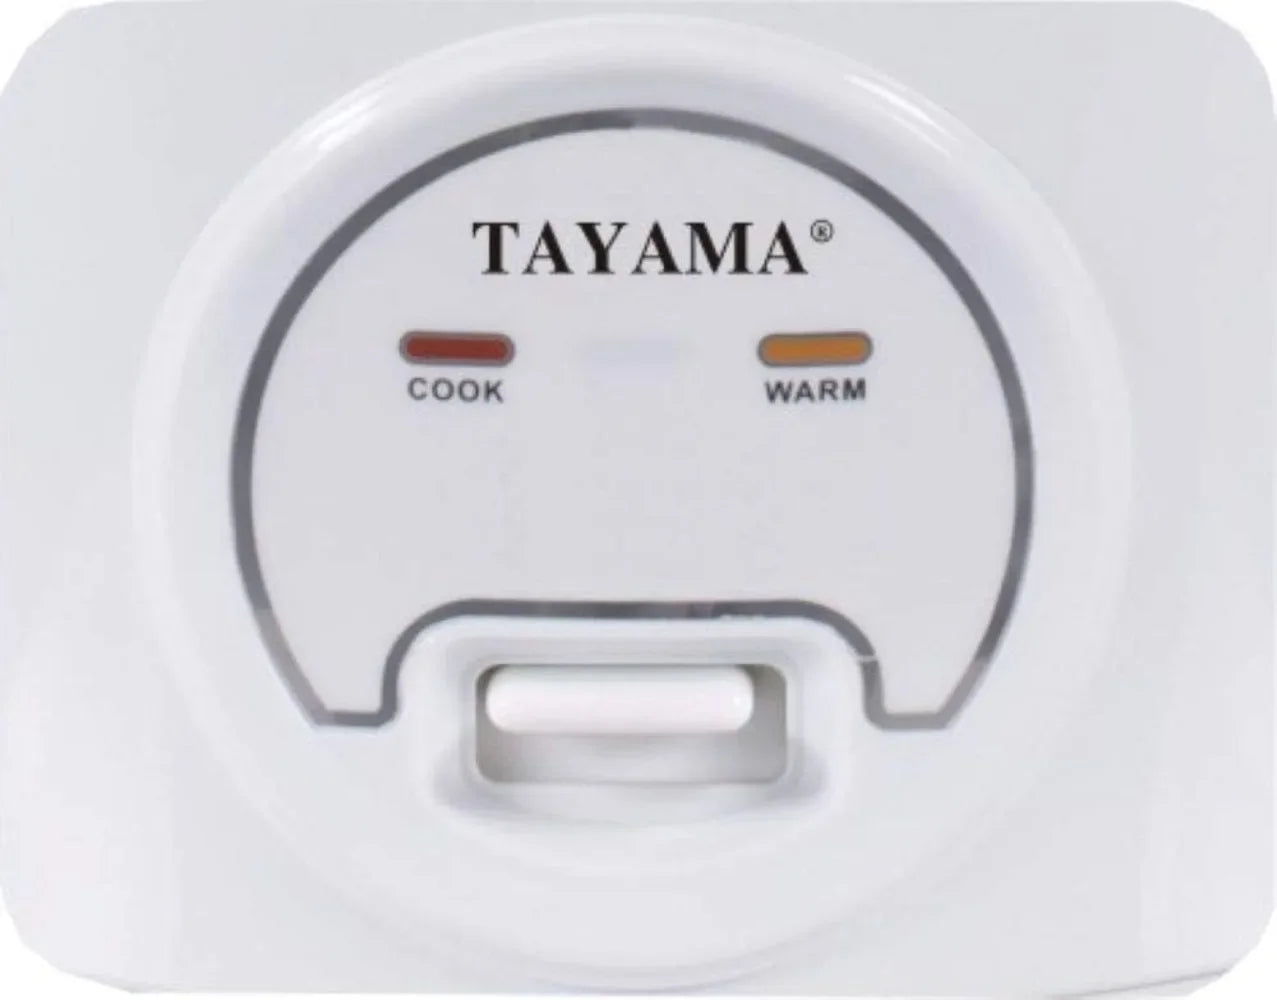 TAYAMA Automatic Rice Cooker & Food Steamer 10 Cup, White (TRC-10RS)